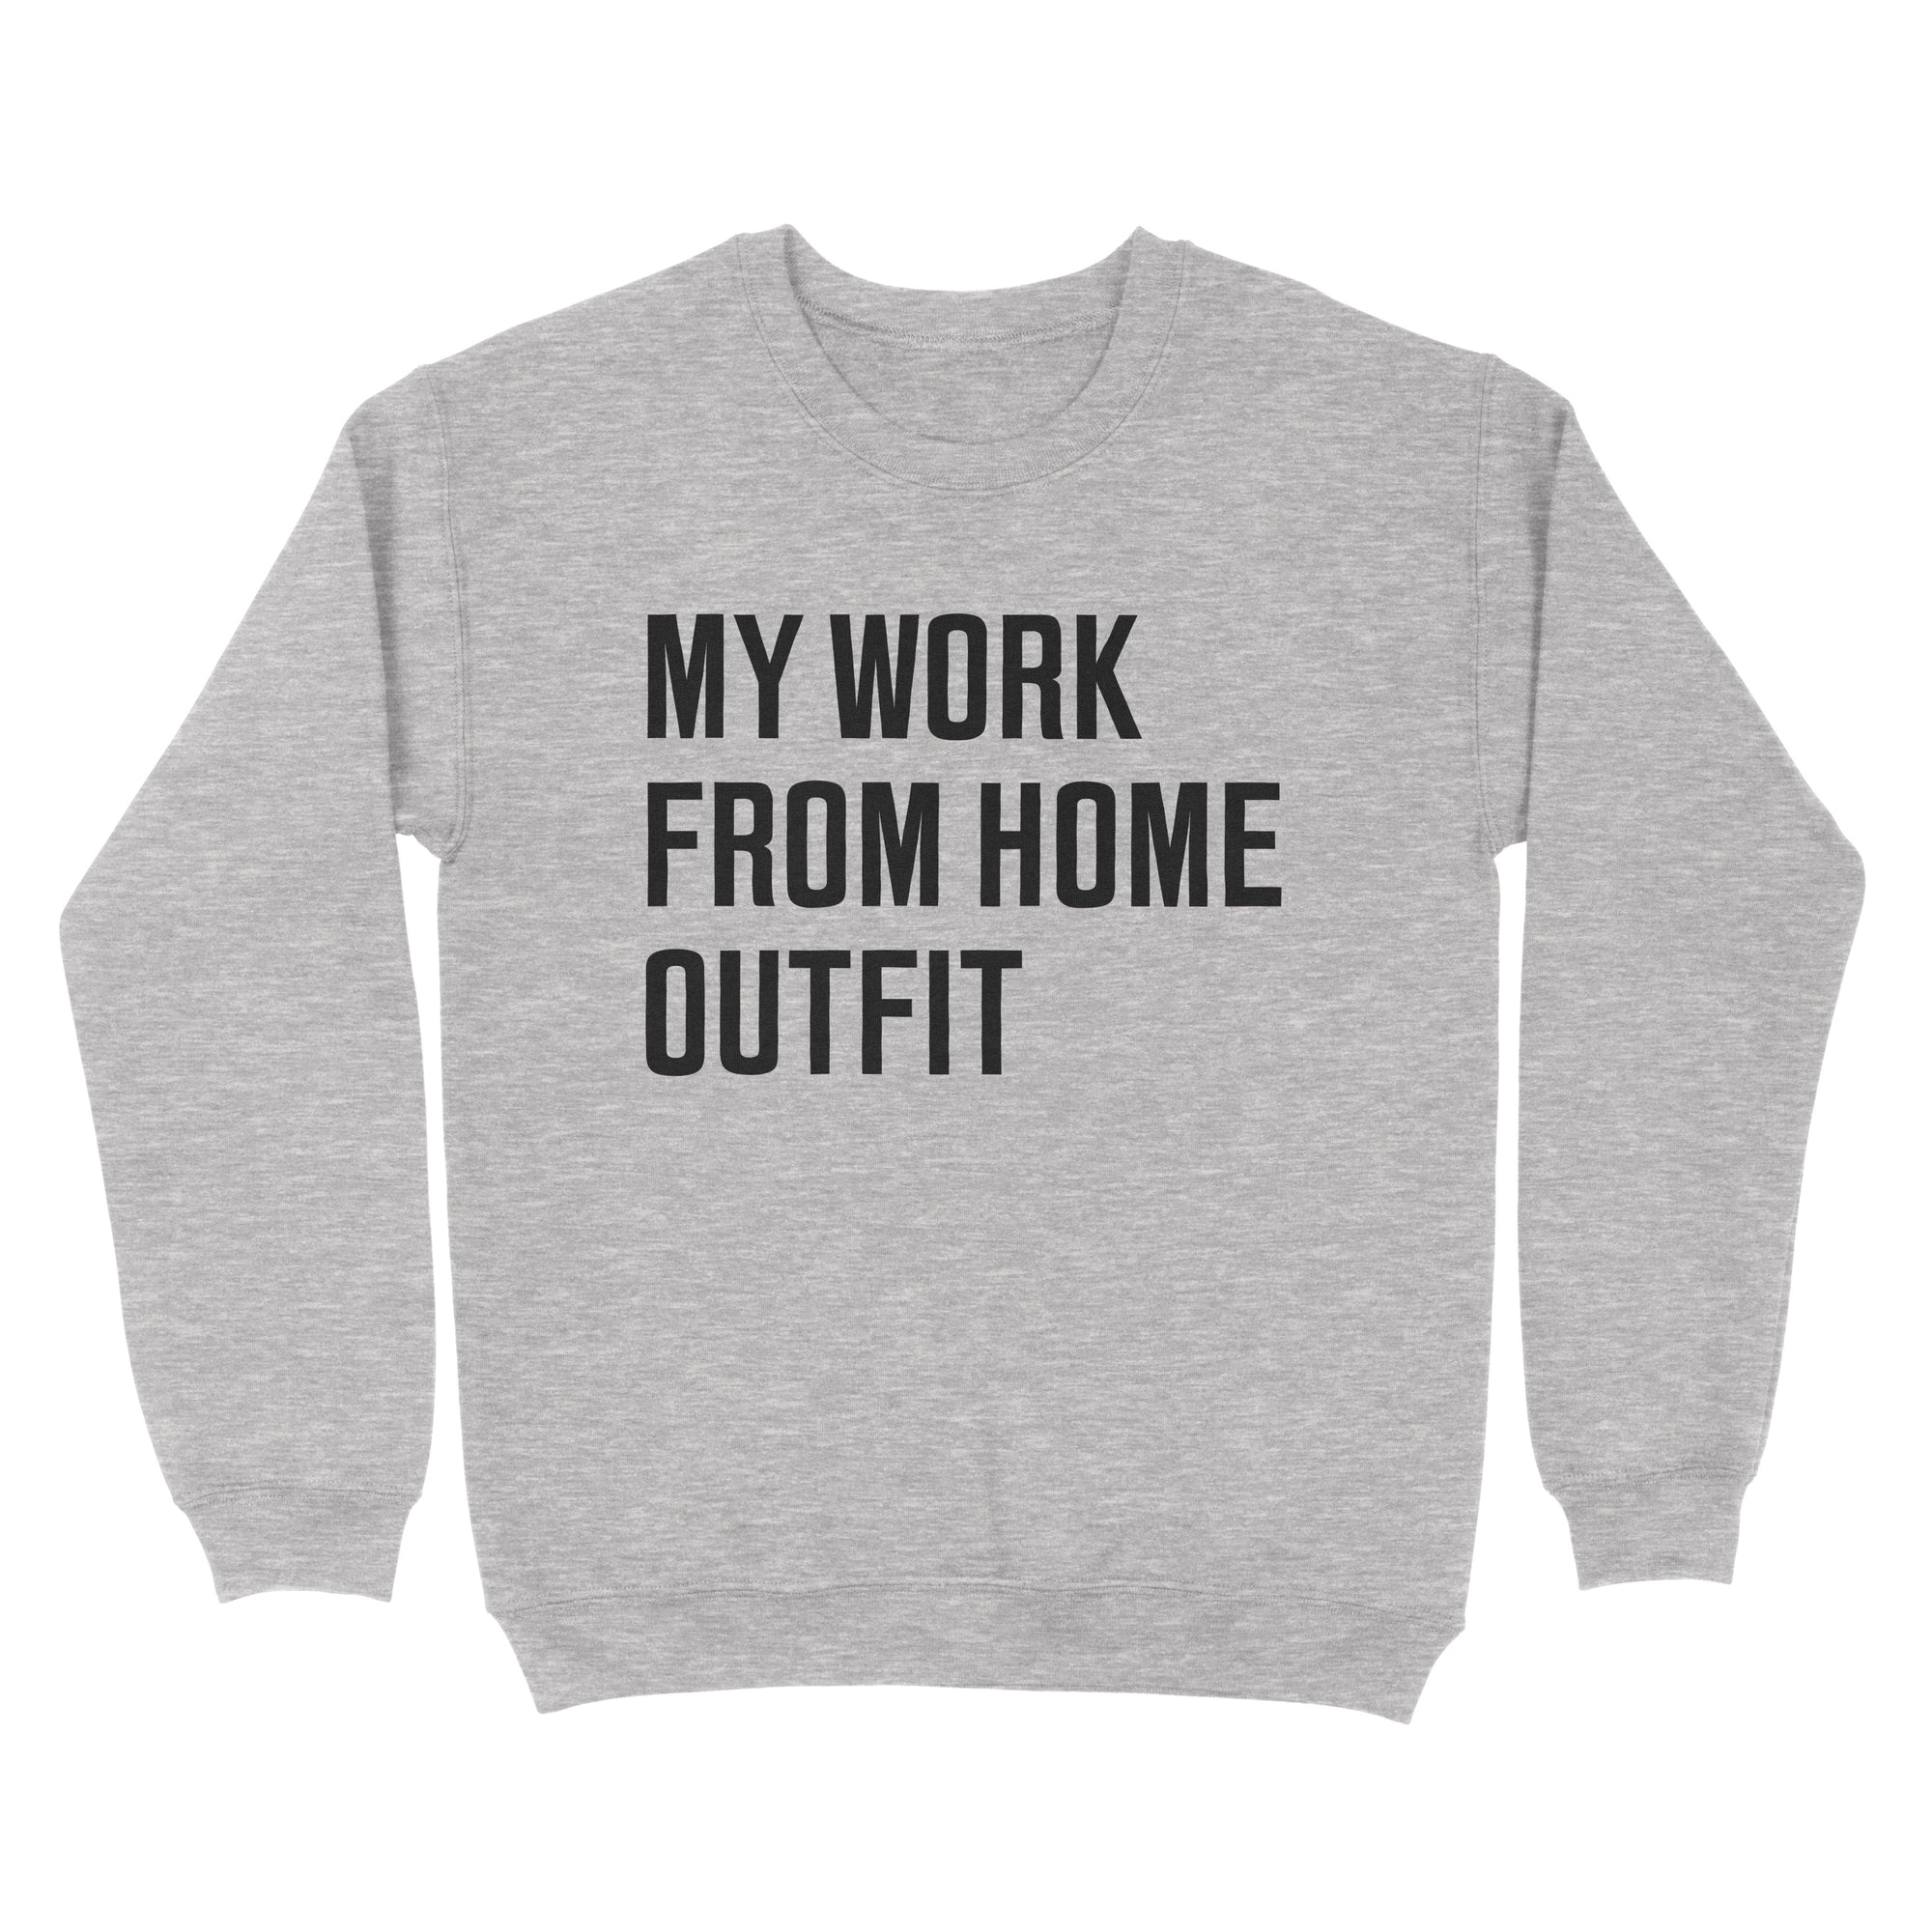 My Work From Home Outfit Sweatshirt - anishphilip